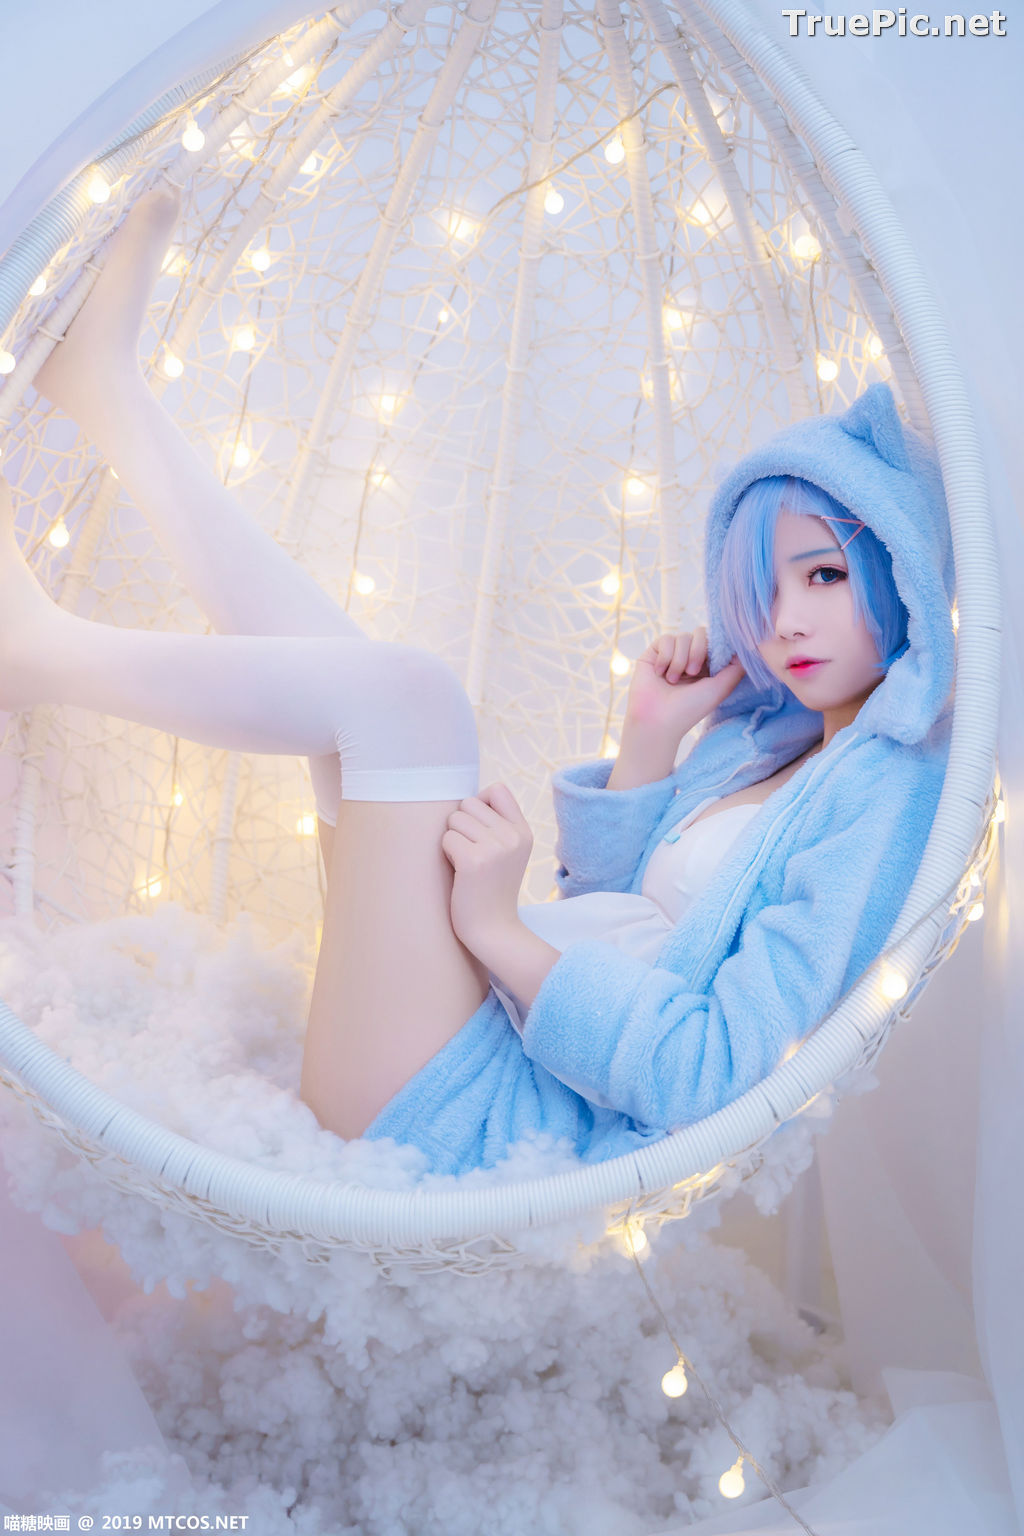 Image [MTCos] 喵糖映画 Vol.043 – Chinese Cute Model – Sexy Rem Cosplay - TruePic.net - Picture-38